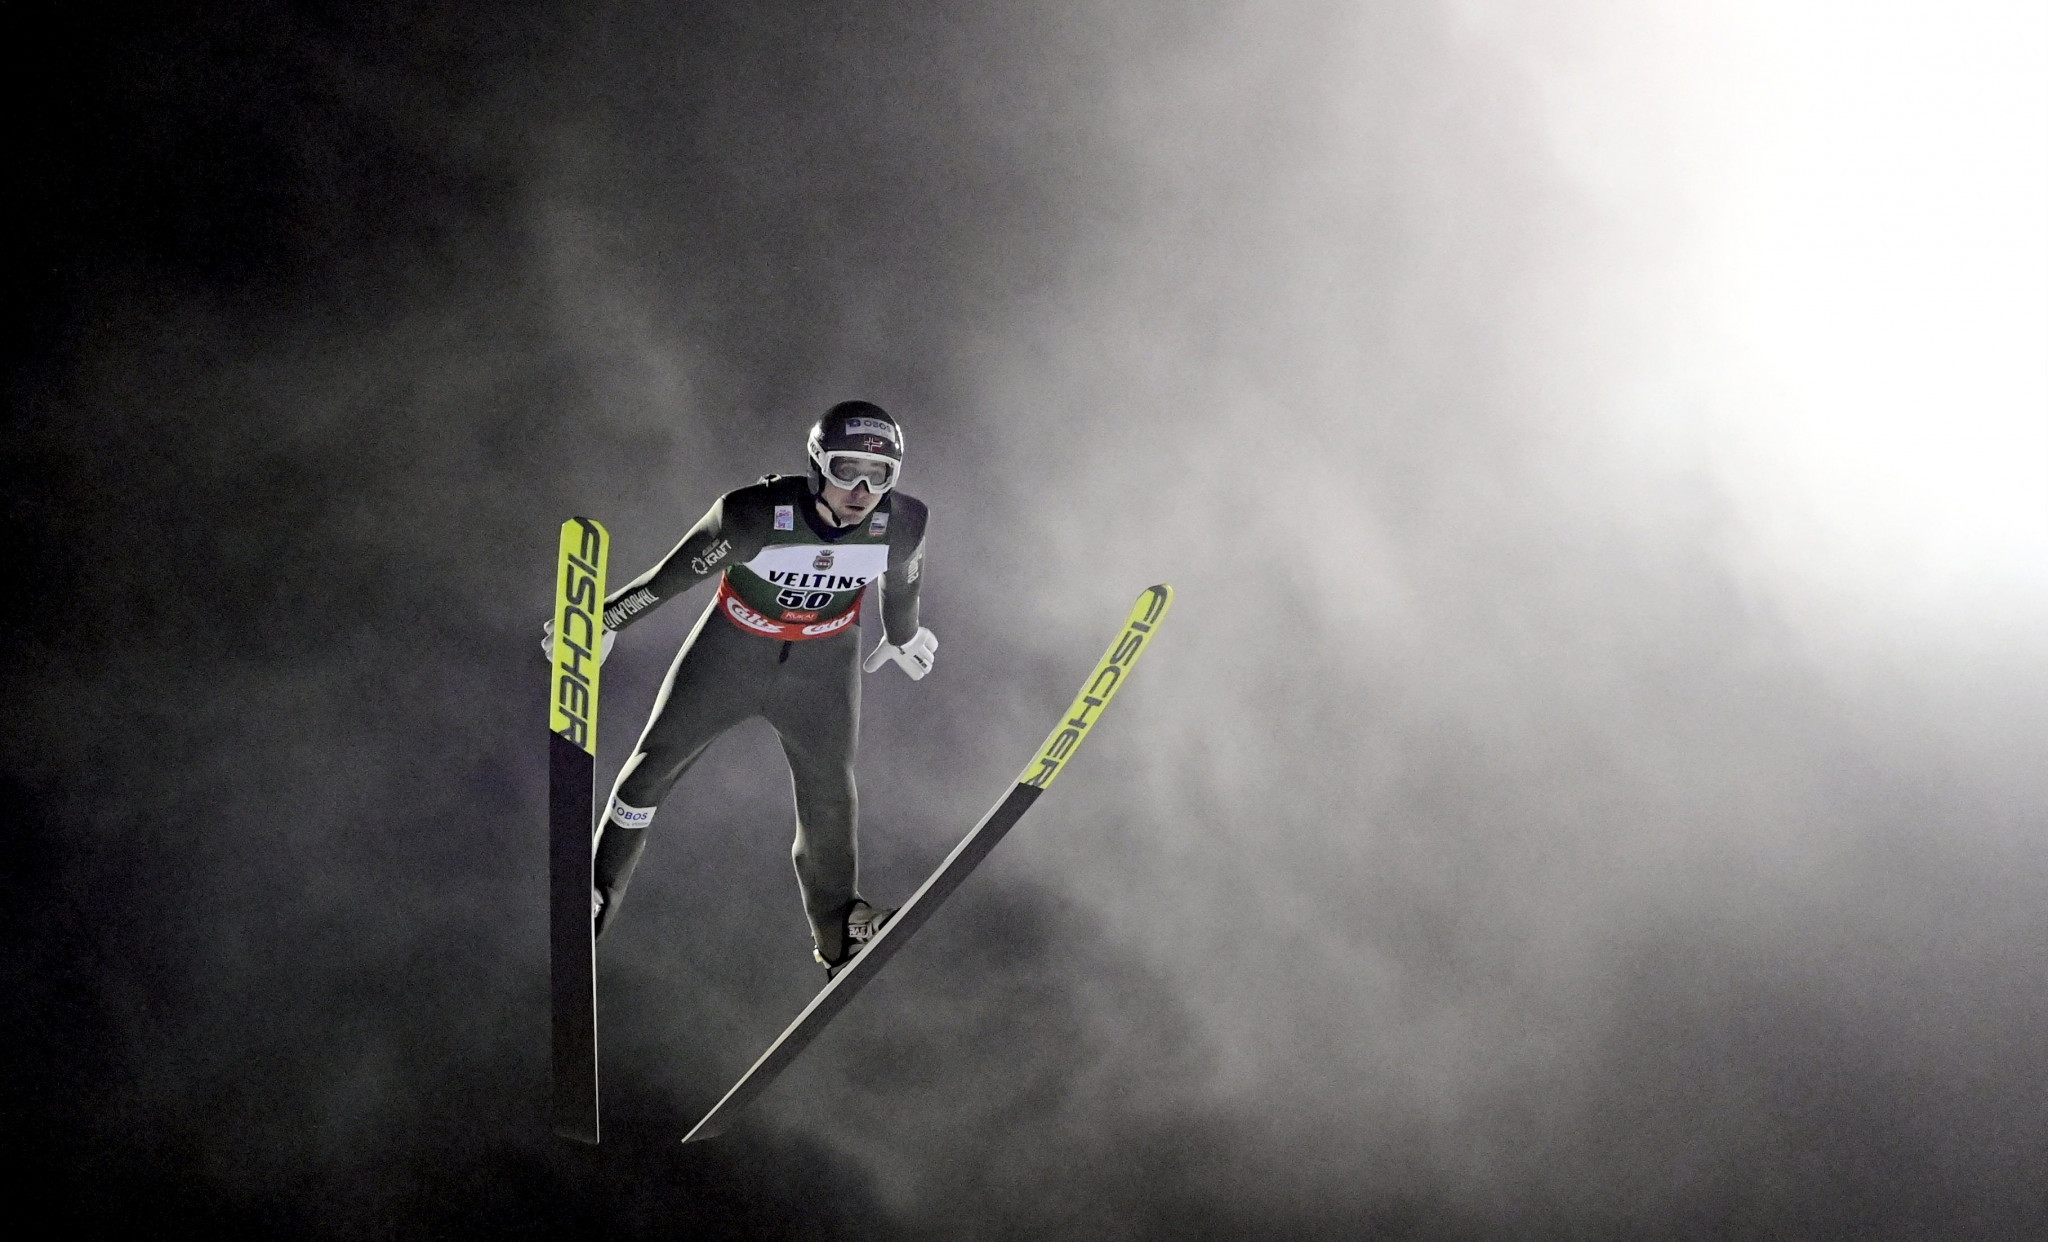 Jarl Magnus Riiber earned a 51st Nordic Combined World Cup victory in Ruka ©Getty Images